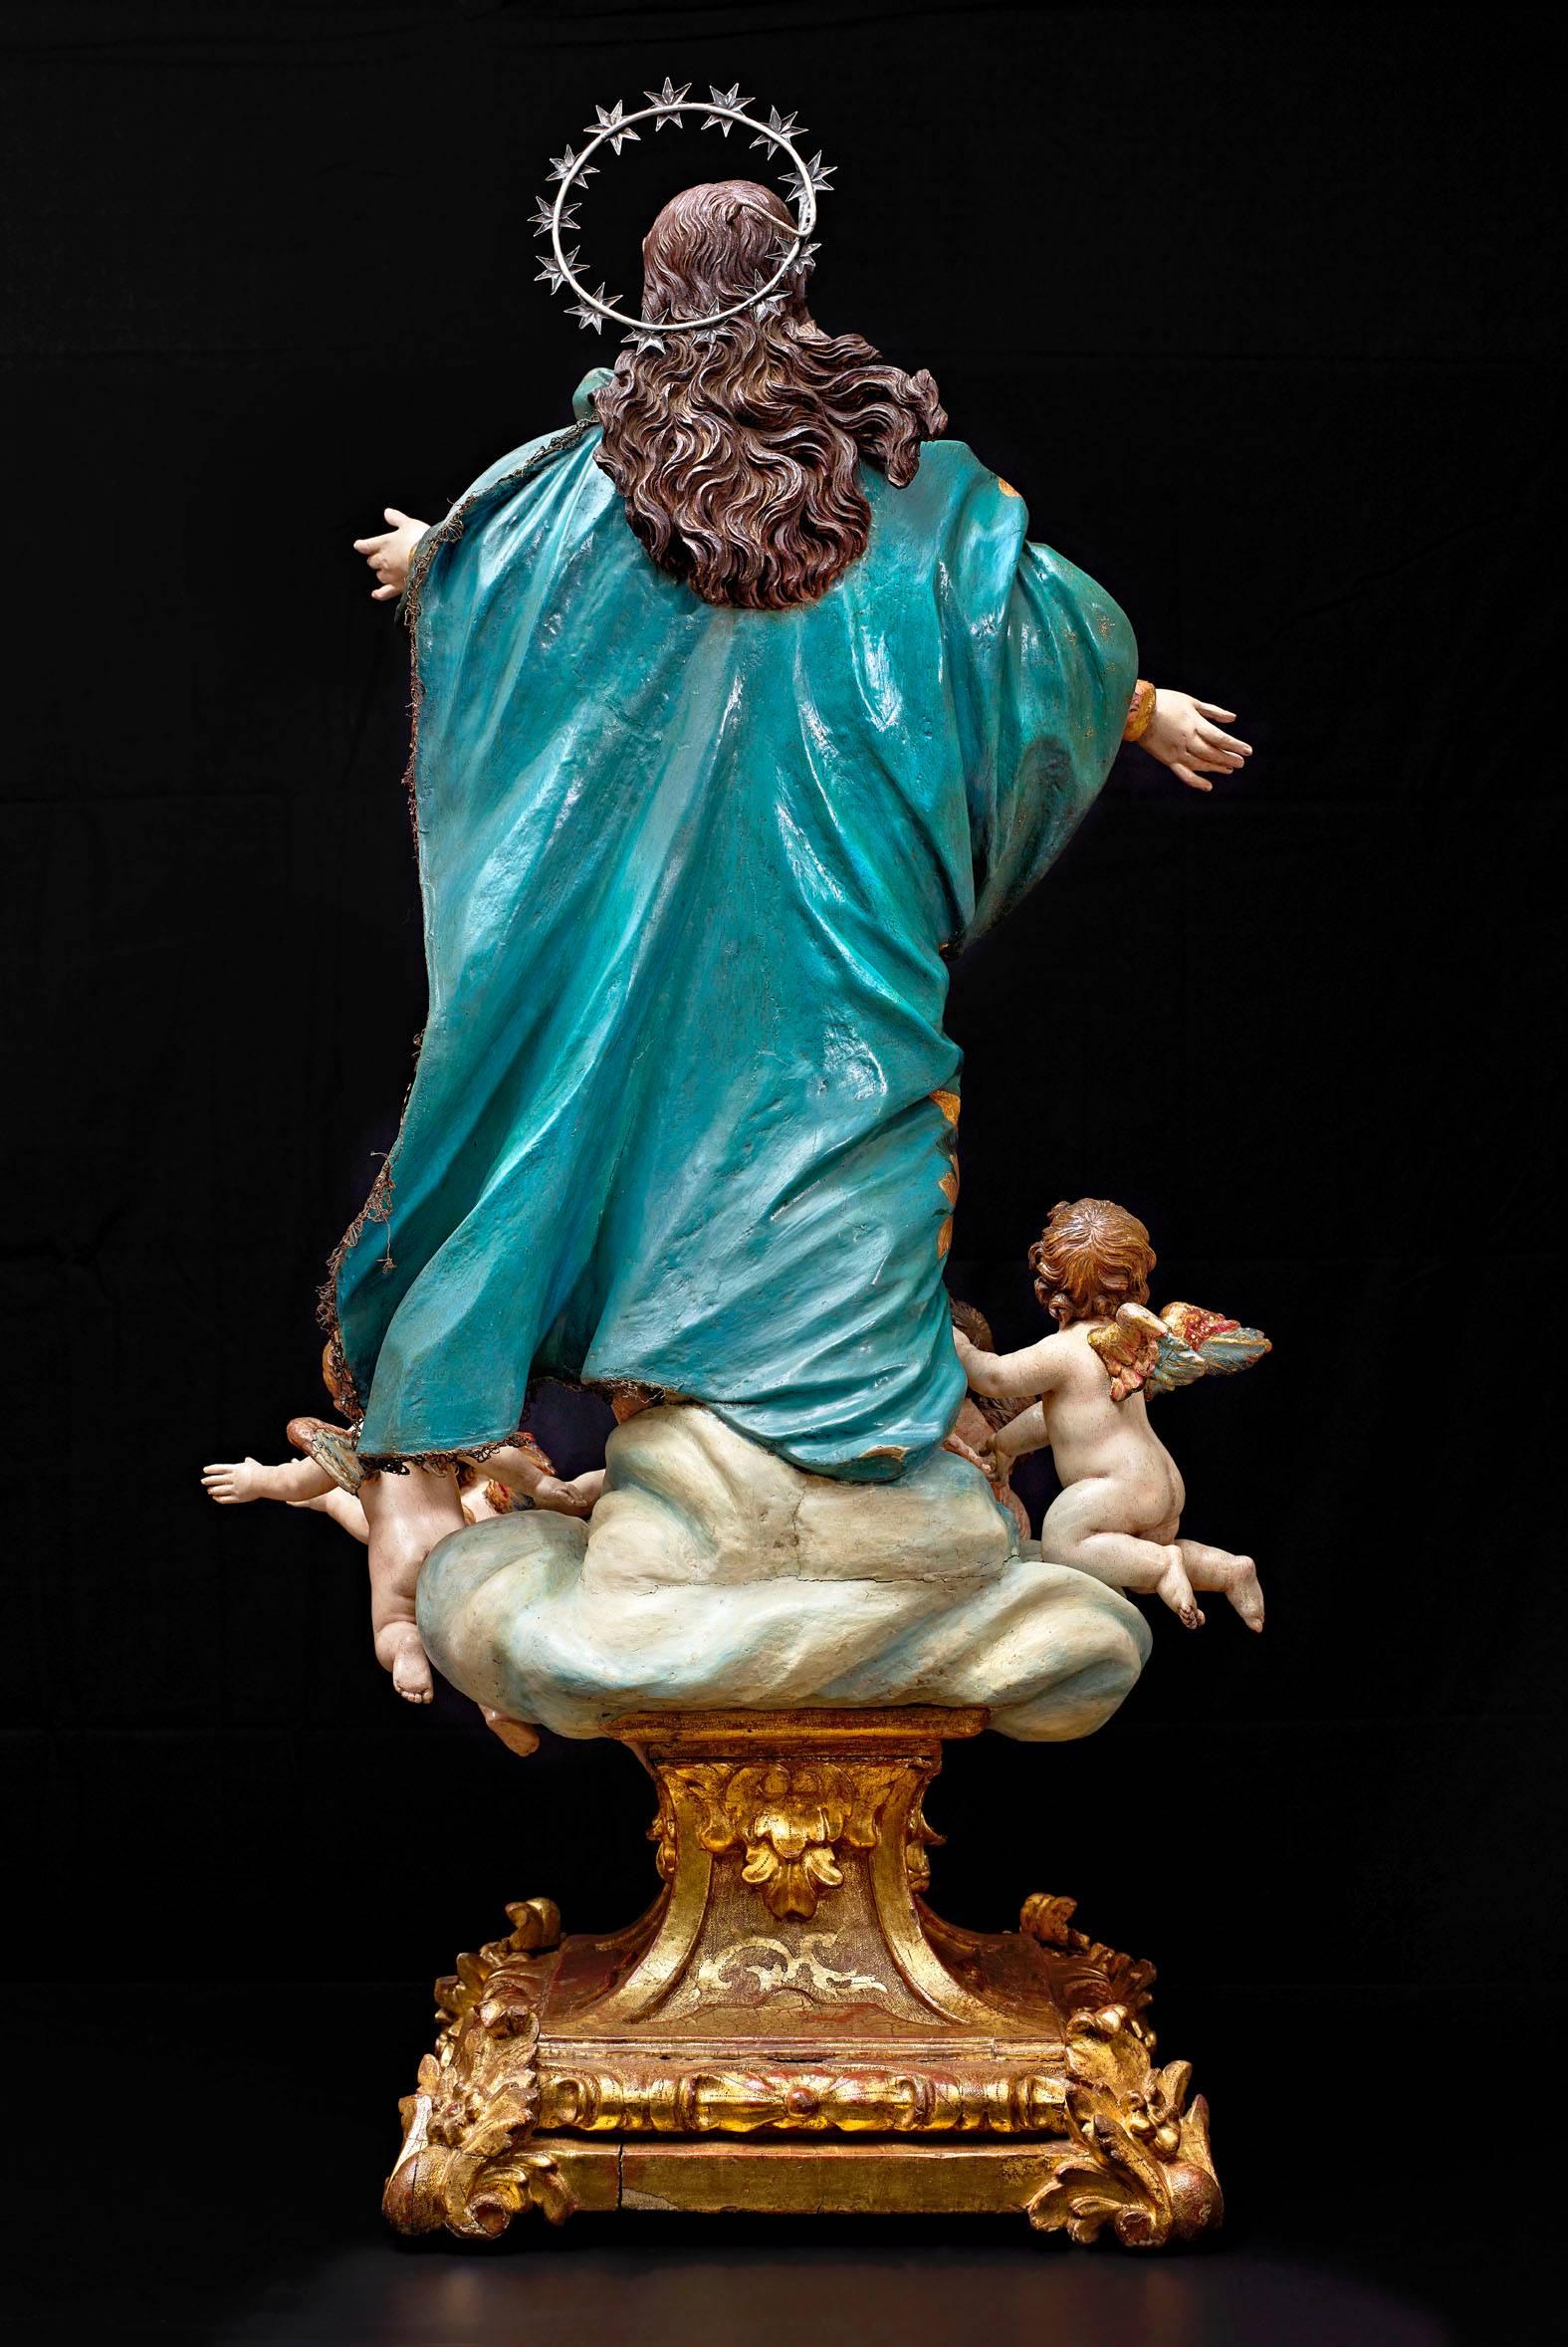 Nicola Fumo
(Saragnano, Salerno, 1647 -, 1725?)
"Assumption of the Virgin"
Spain, 17th century.
Carved and polychromed wood
Measures: 100 x 40 x 40 cms.

Nicola Fumo was an Italian Baroque architect and sculptor, considered one of